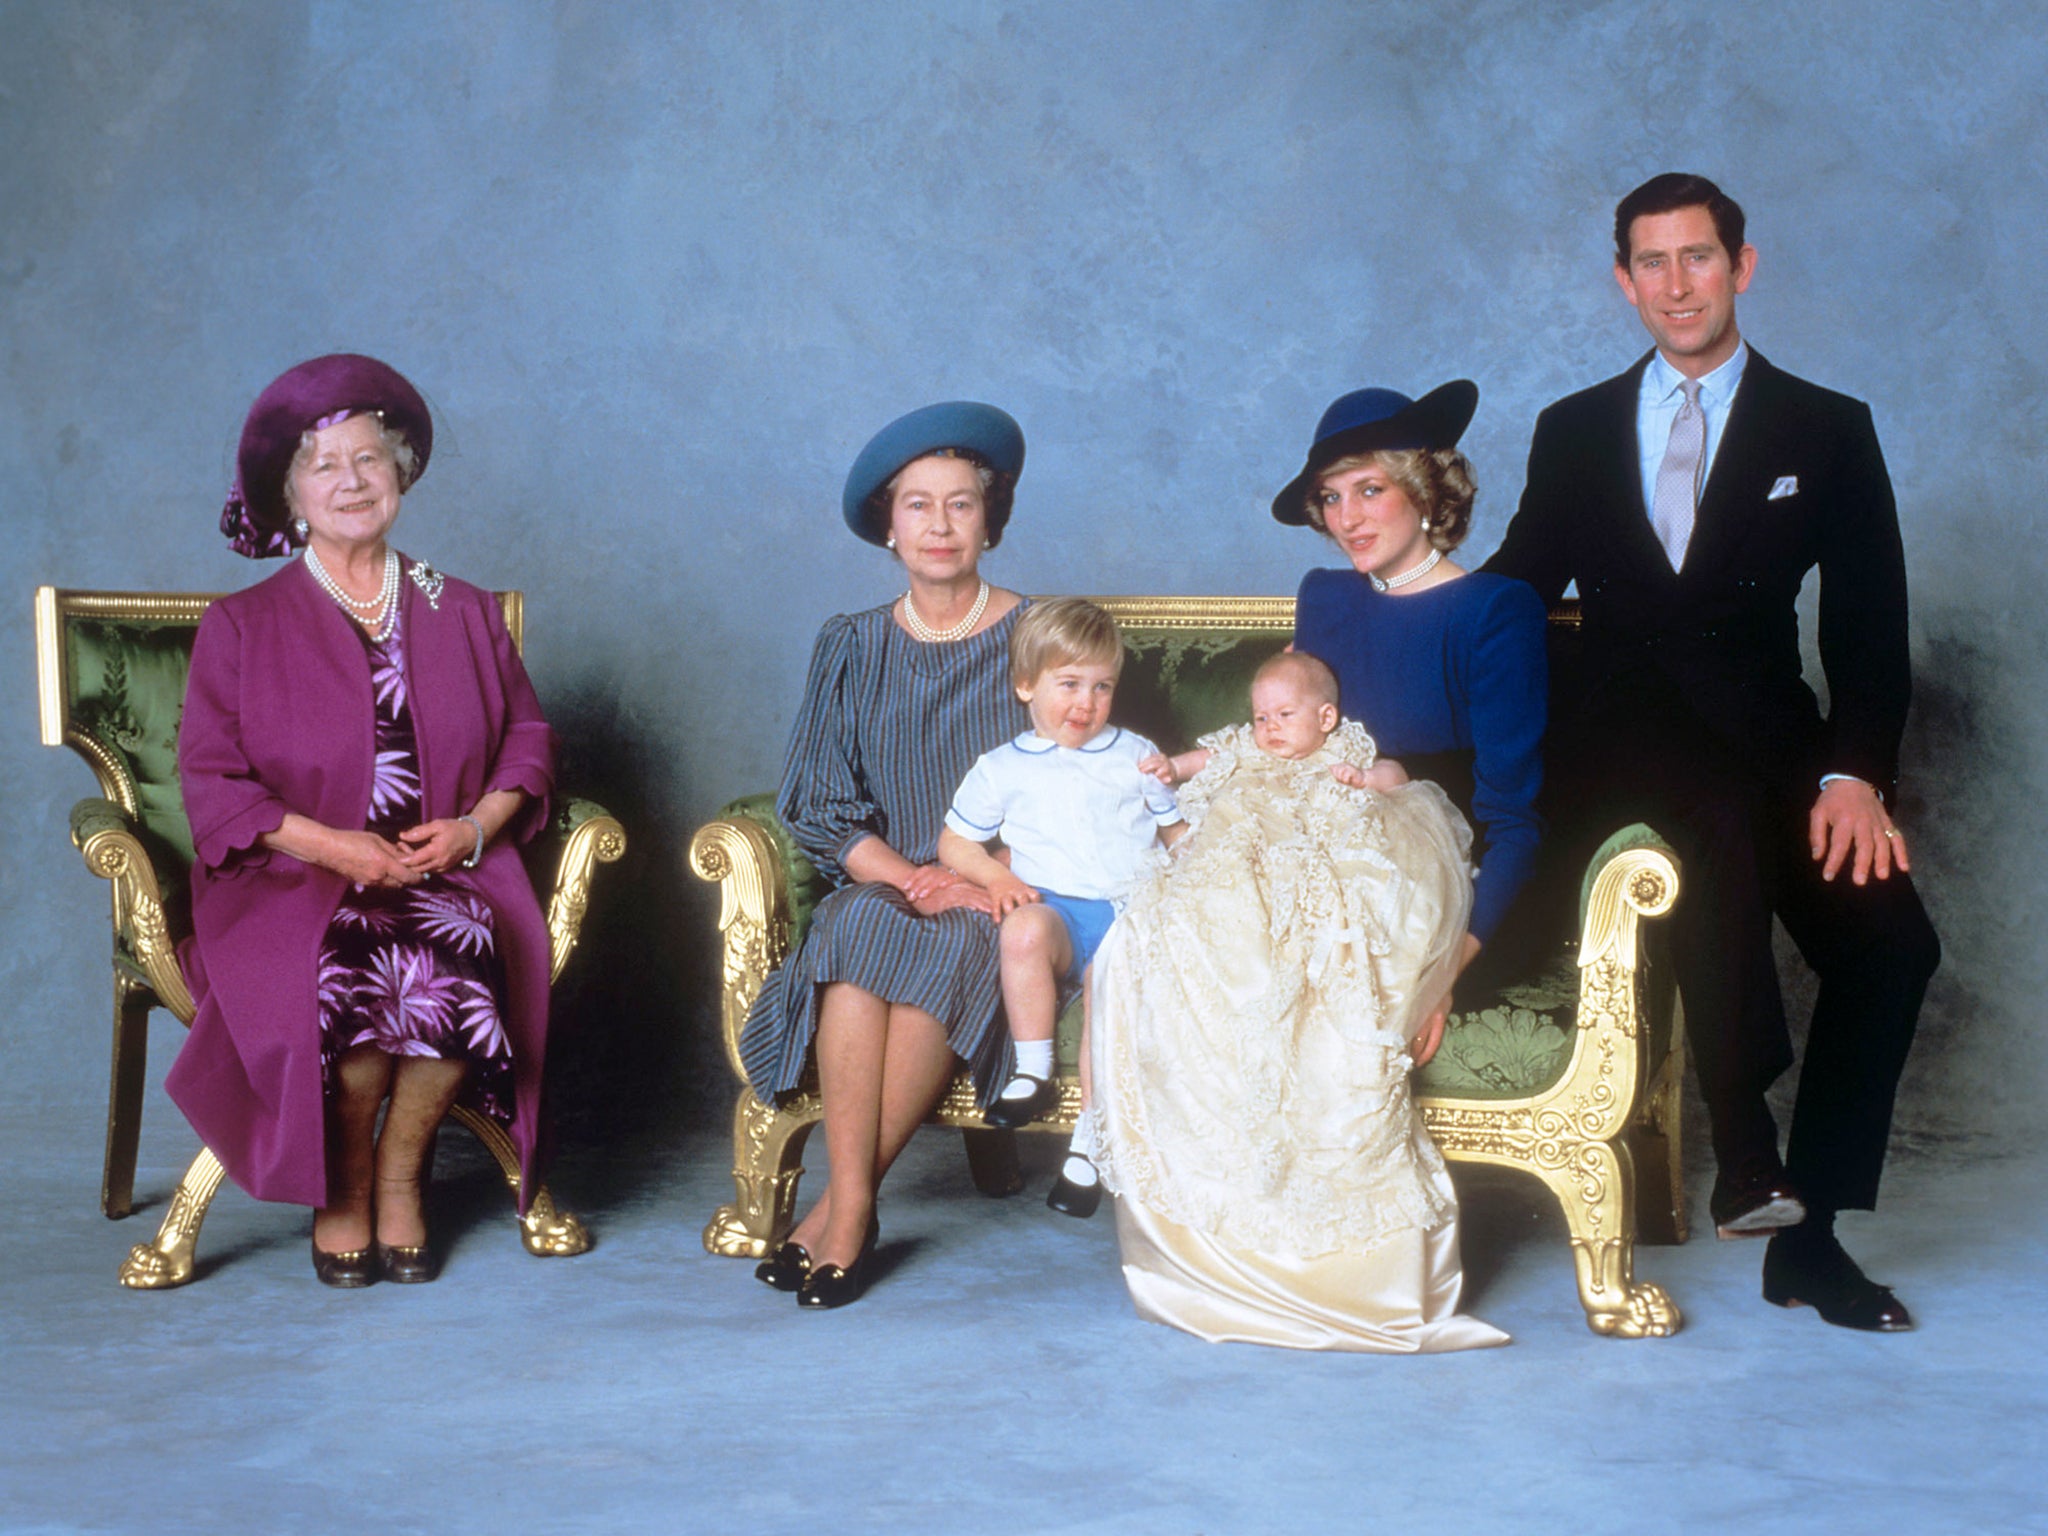 (Left to right) the Queen Mother, Queen Elizabeth II, Prince William, Prince Harry and the Prince and Princess of Wales after the christening ceremony of Prince Harry, 1984